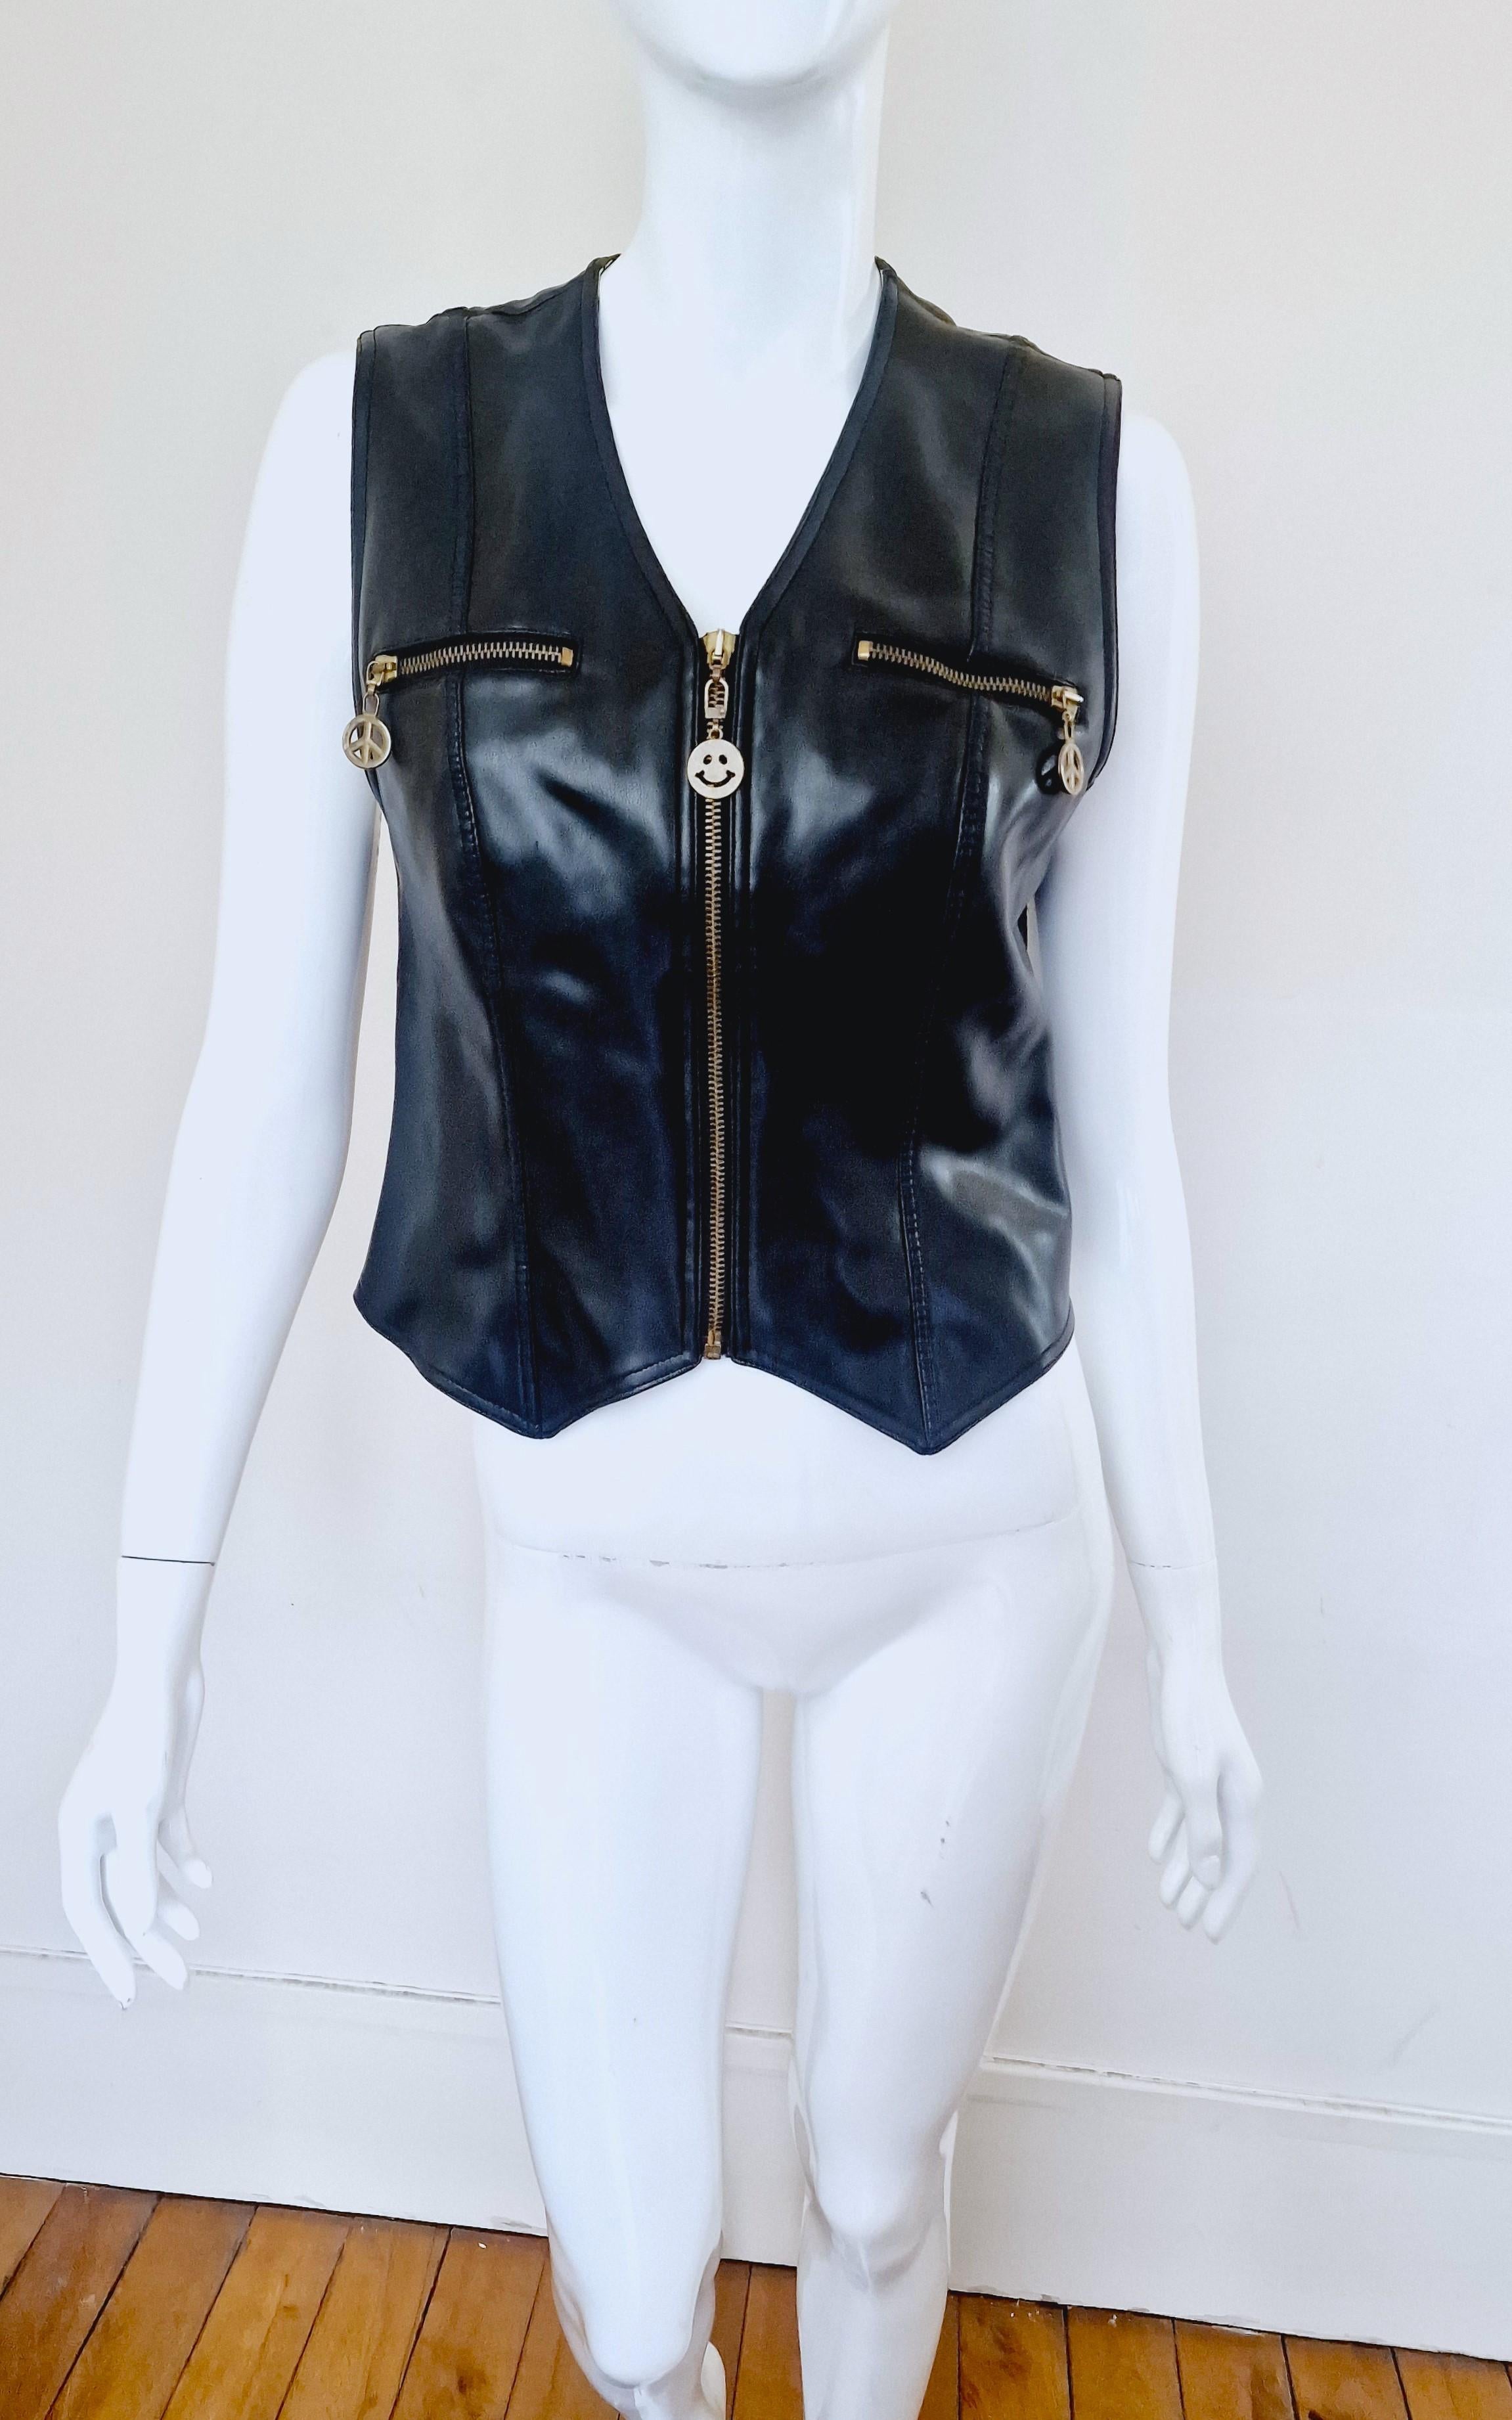 Faux leather biker vest by Moschino! 
Moschino peace and smiley buttons.
2 front pockets.
Bella Hadid worn a similar Moschino piece and shared the photos on her Instagram in 2020. 

VERY GOOD condition! Outside: like new. Inside: modarate sign of